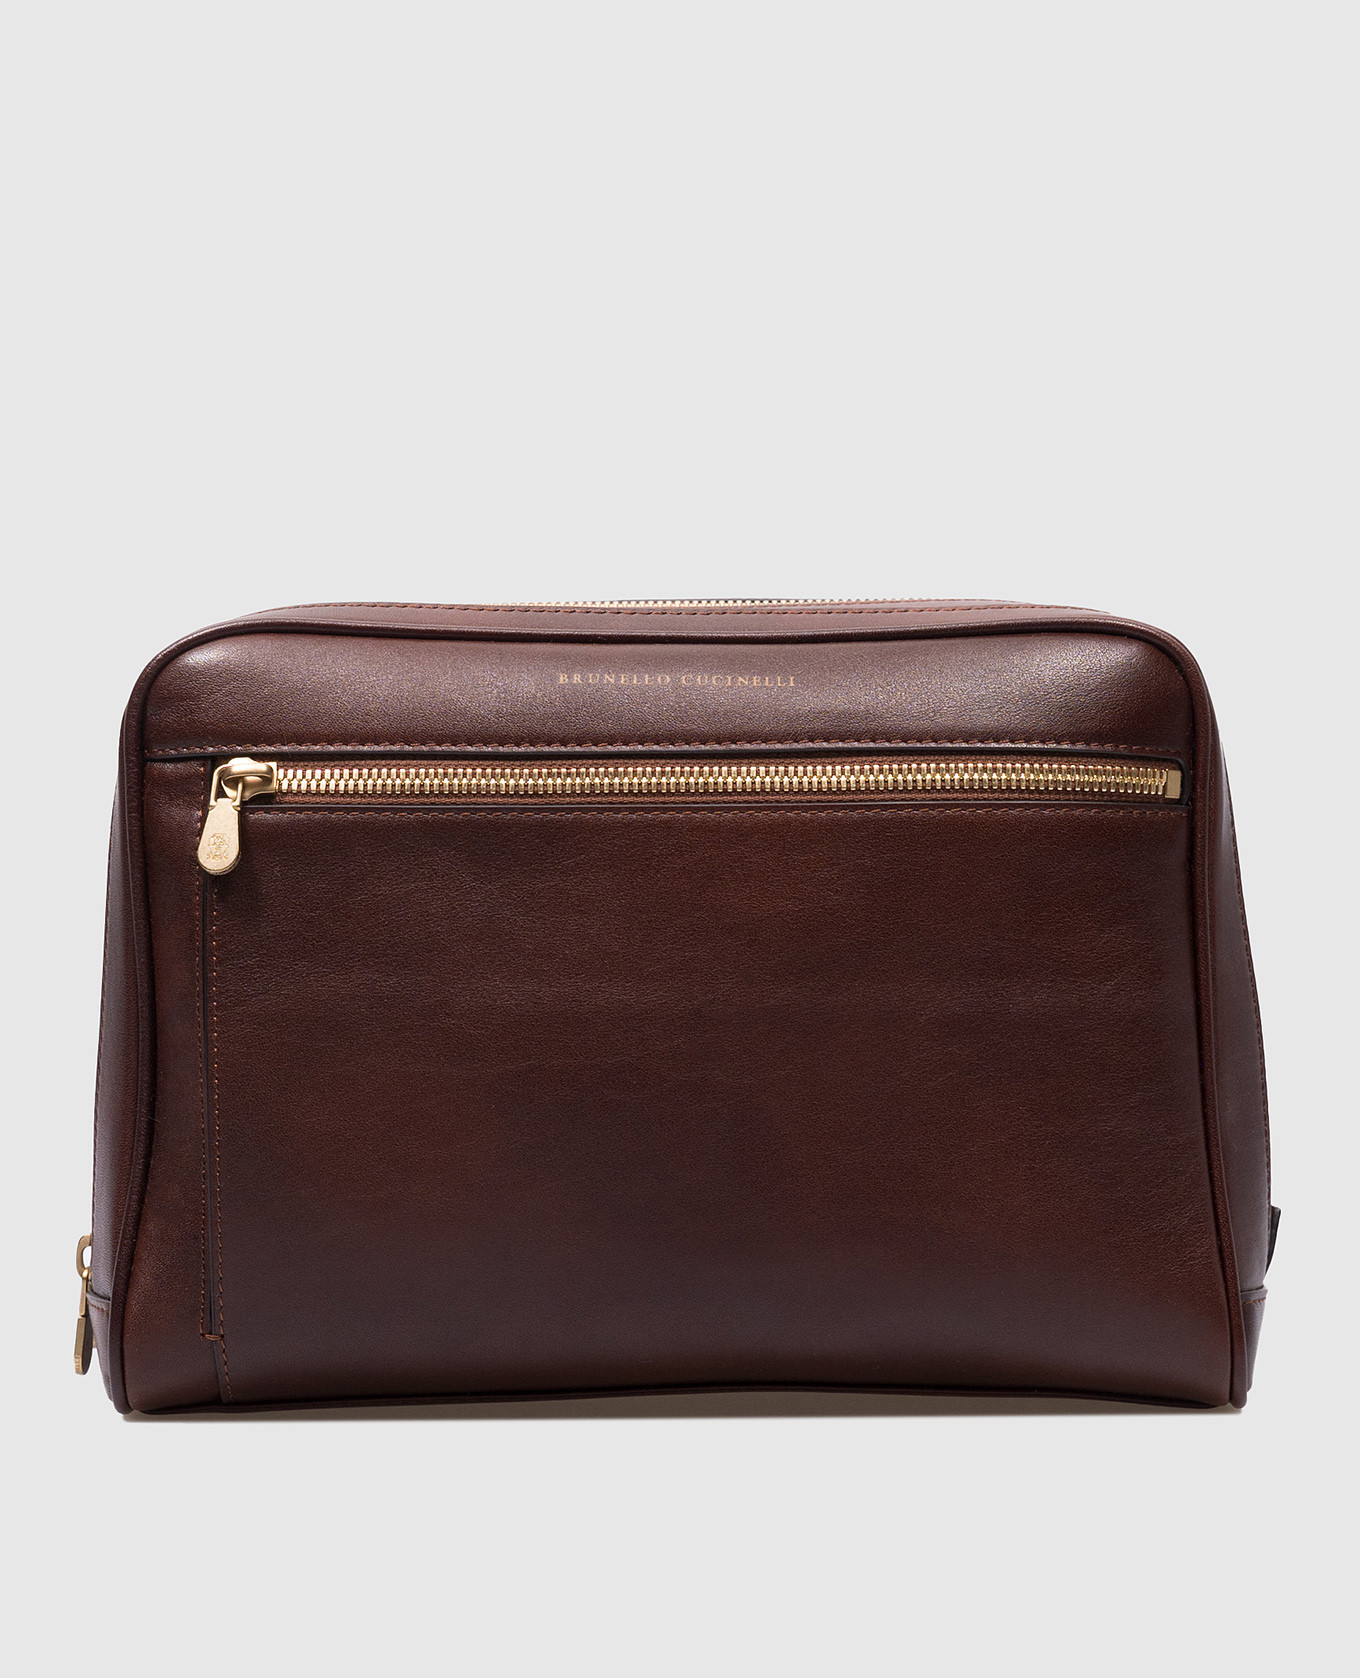 Brown leather toiletry bag with logo